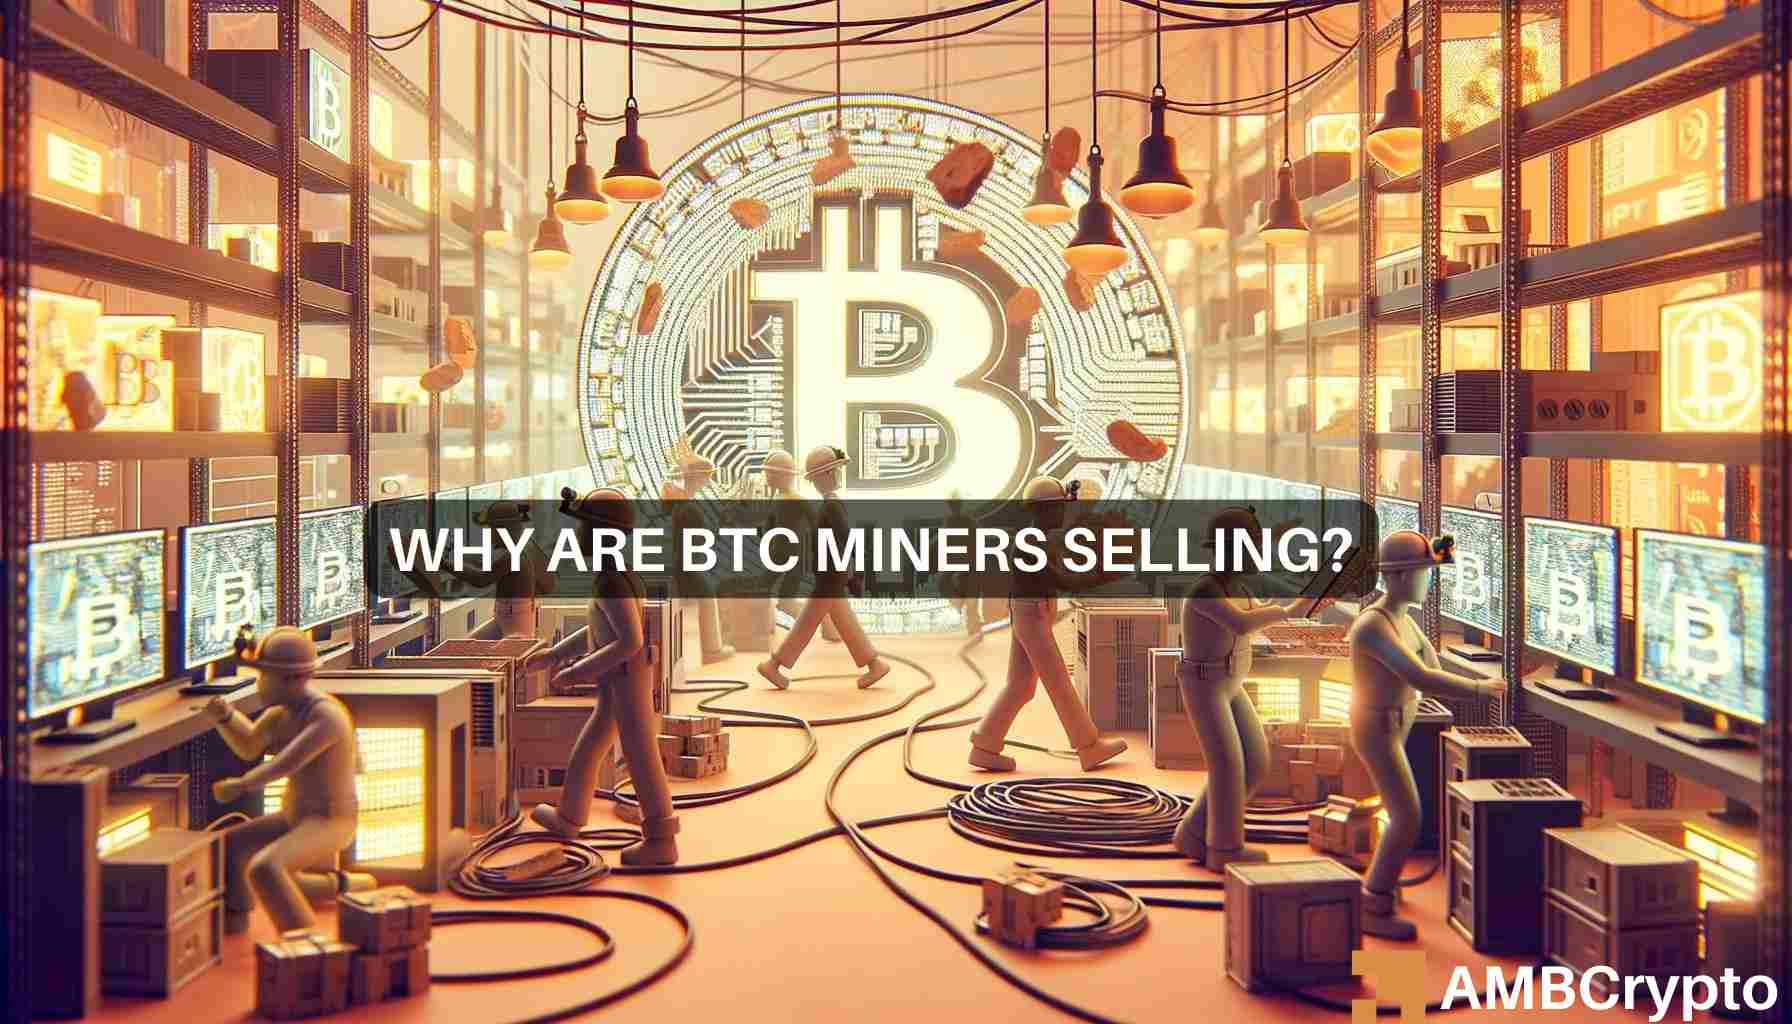 Bitcoin miners are facing sell pressure, which could potentially lead to a significant market sell-off.